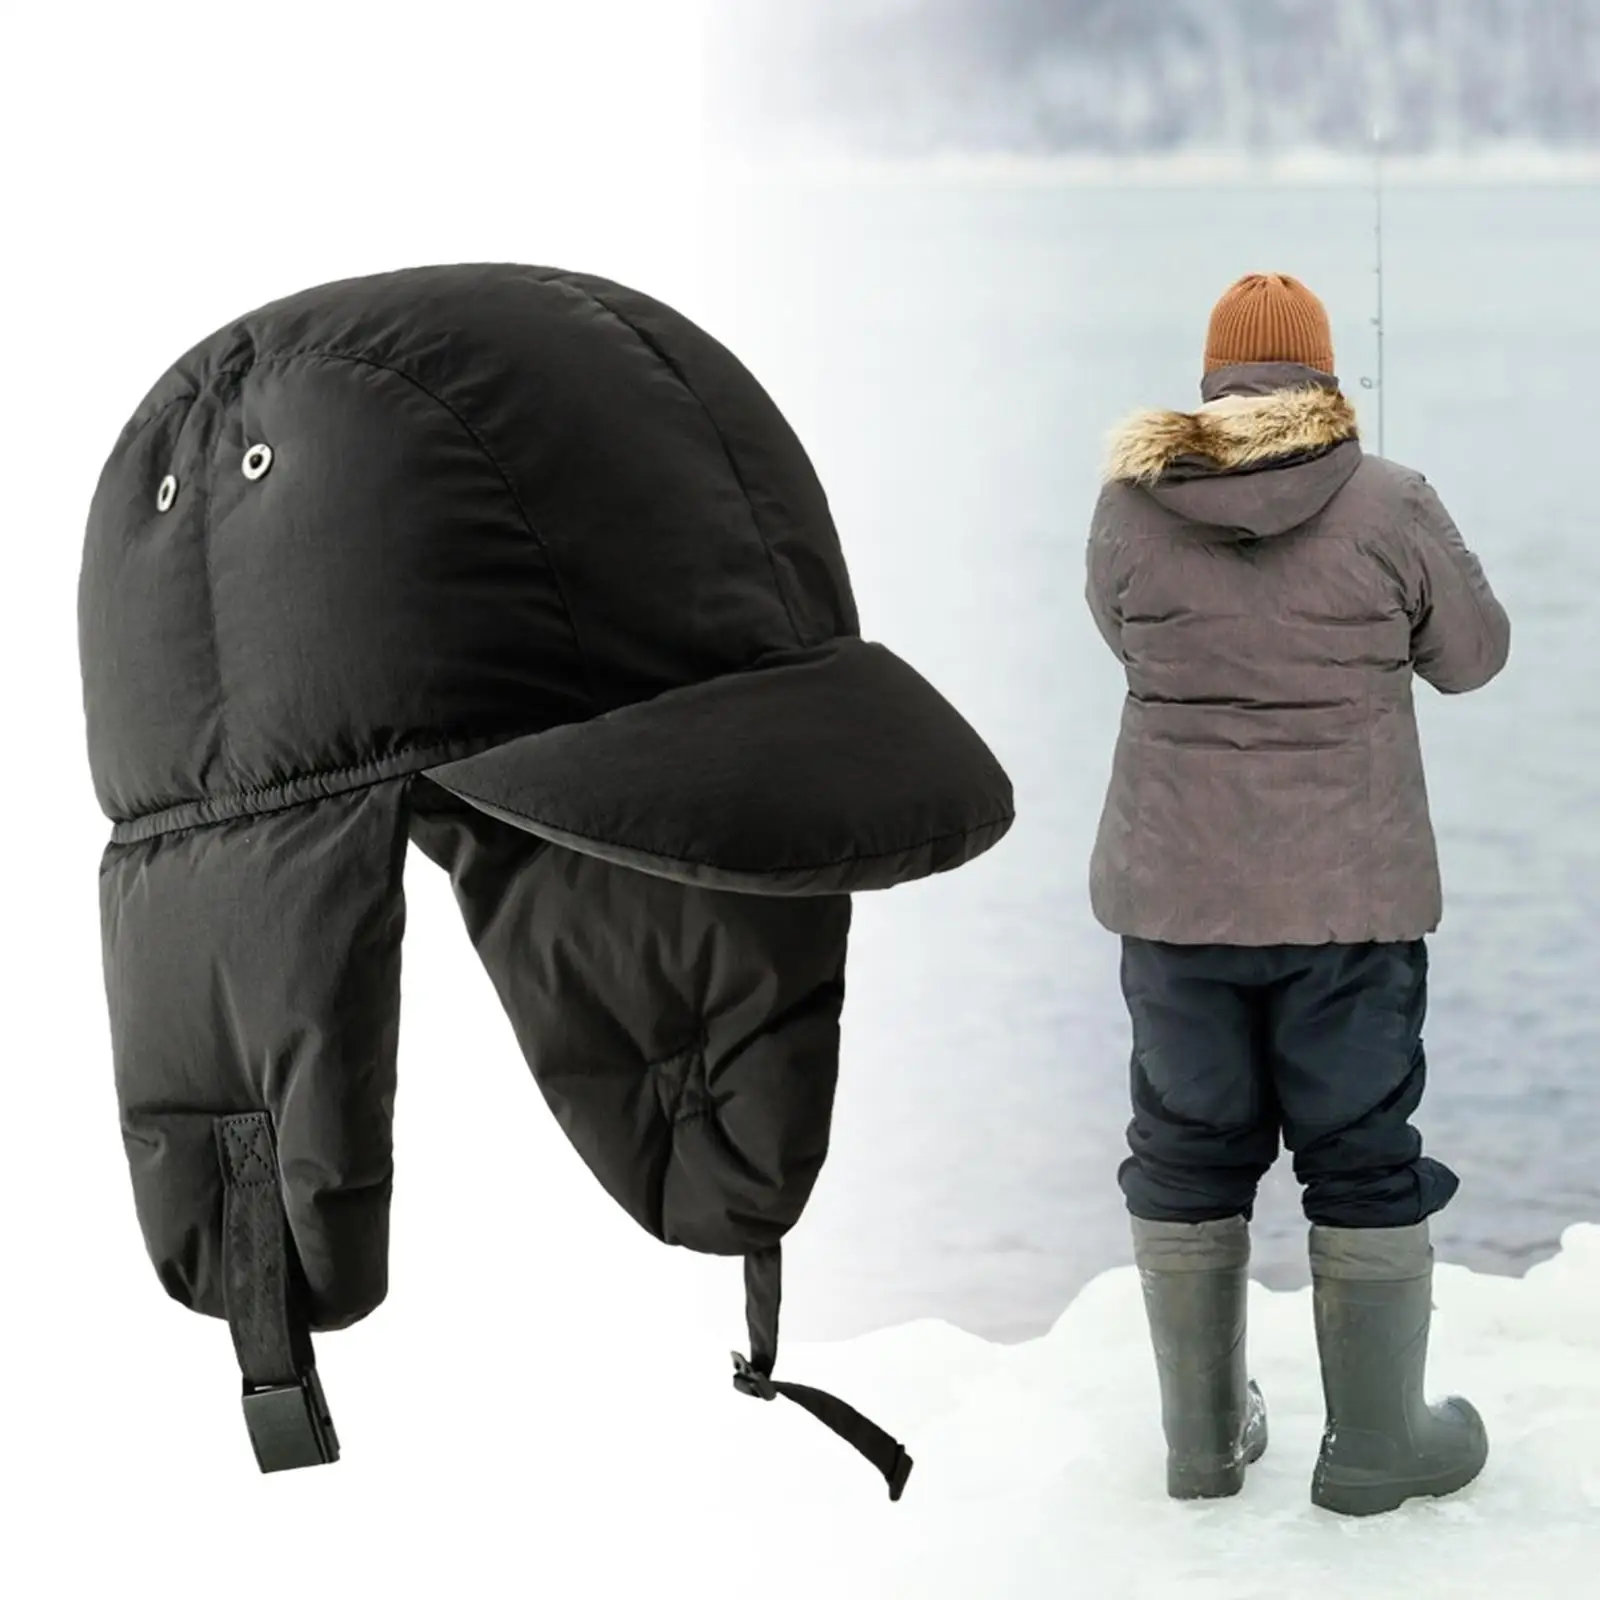 Hat with Earflaps Fashionable Baseball Cap for Women Peaked Hat Thickened Filled Hat for Hiking Skating Biking Outdoor Adults